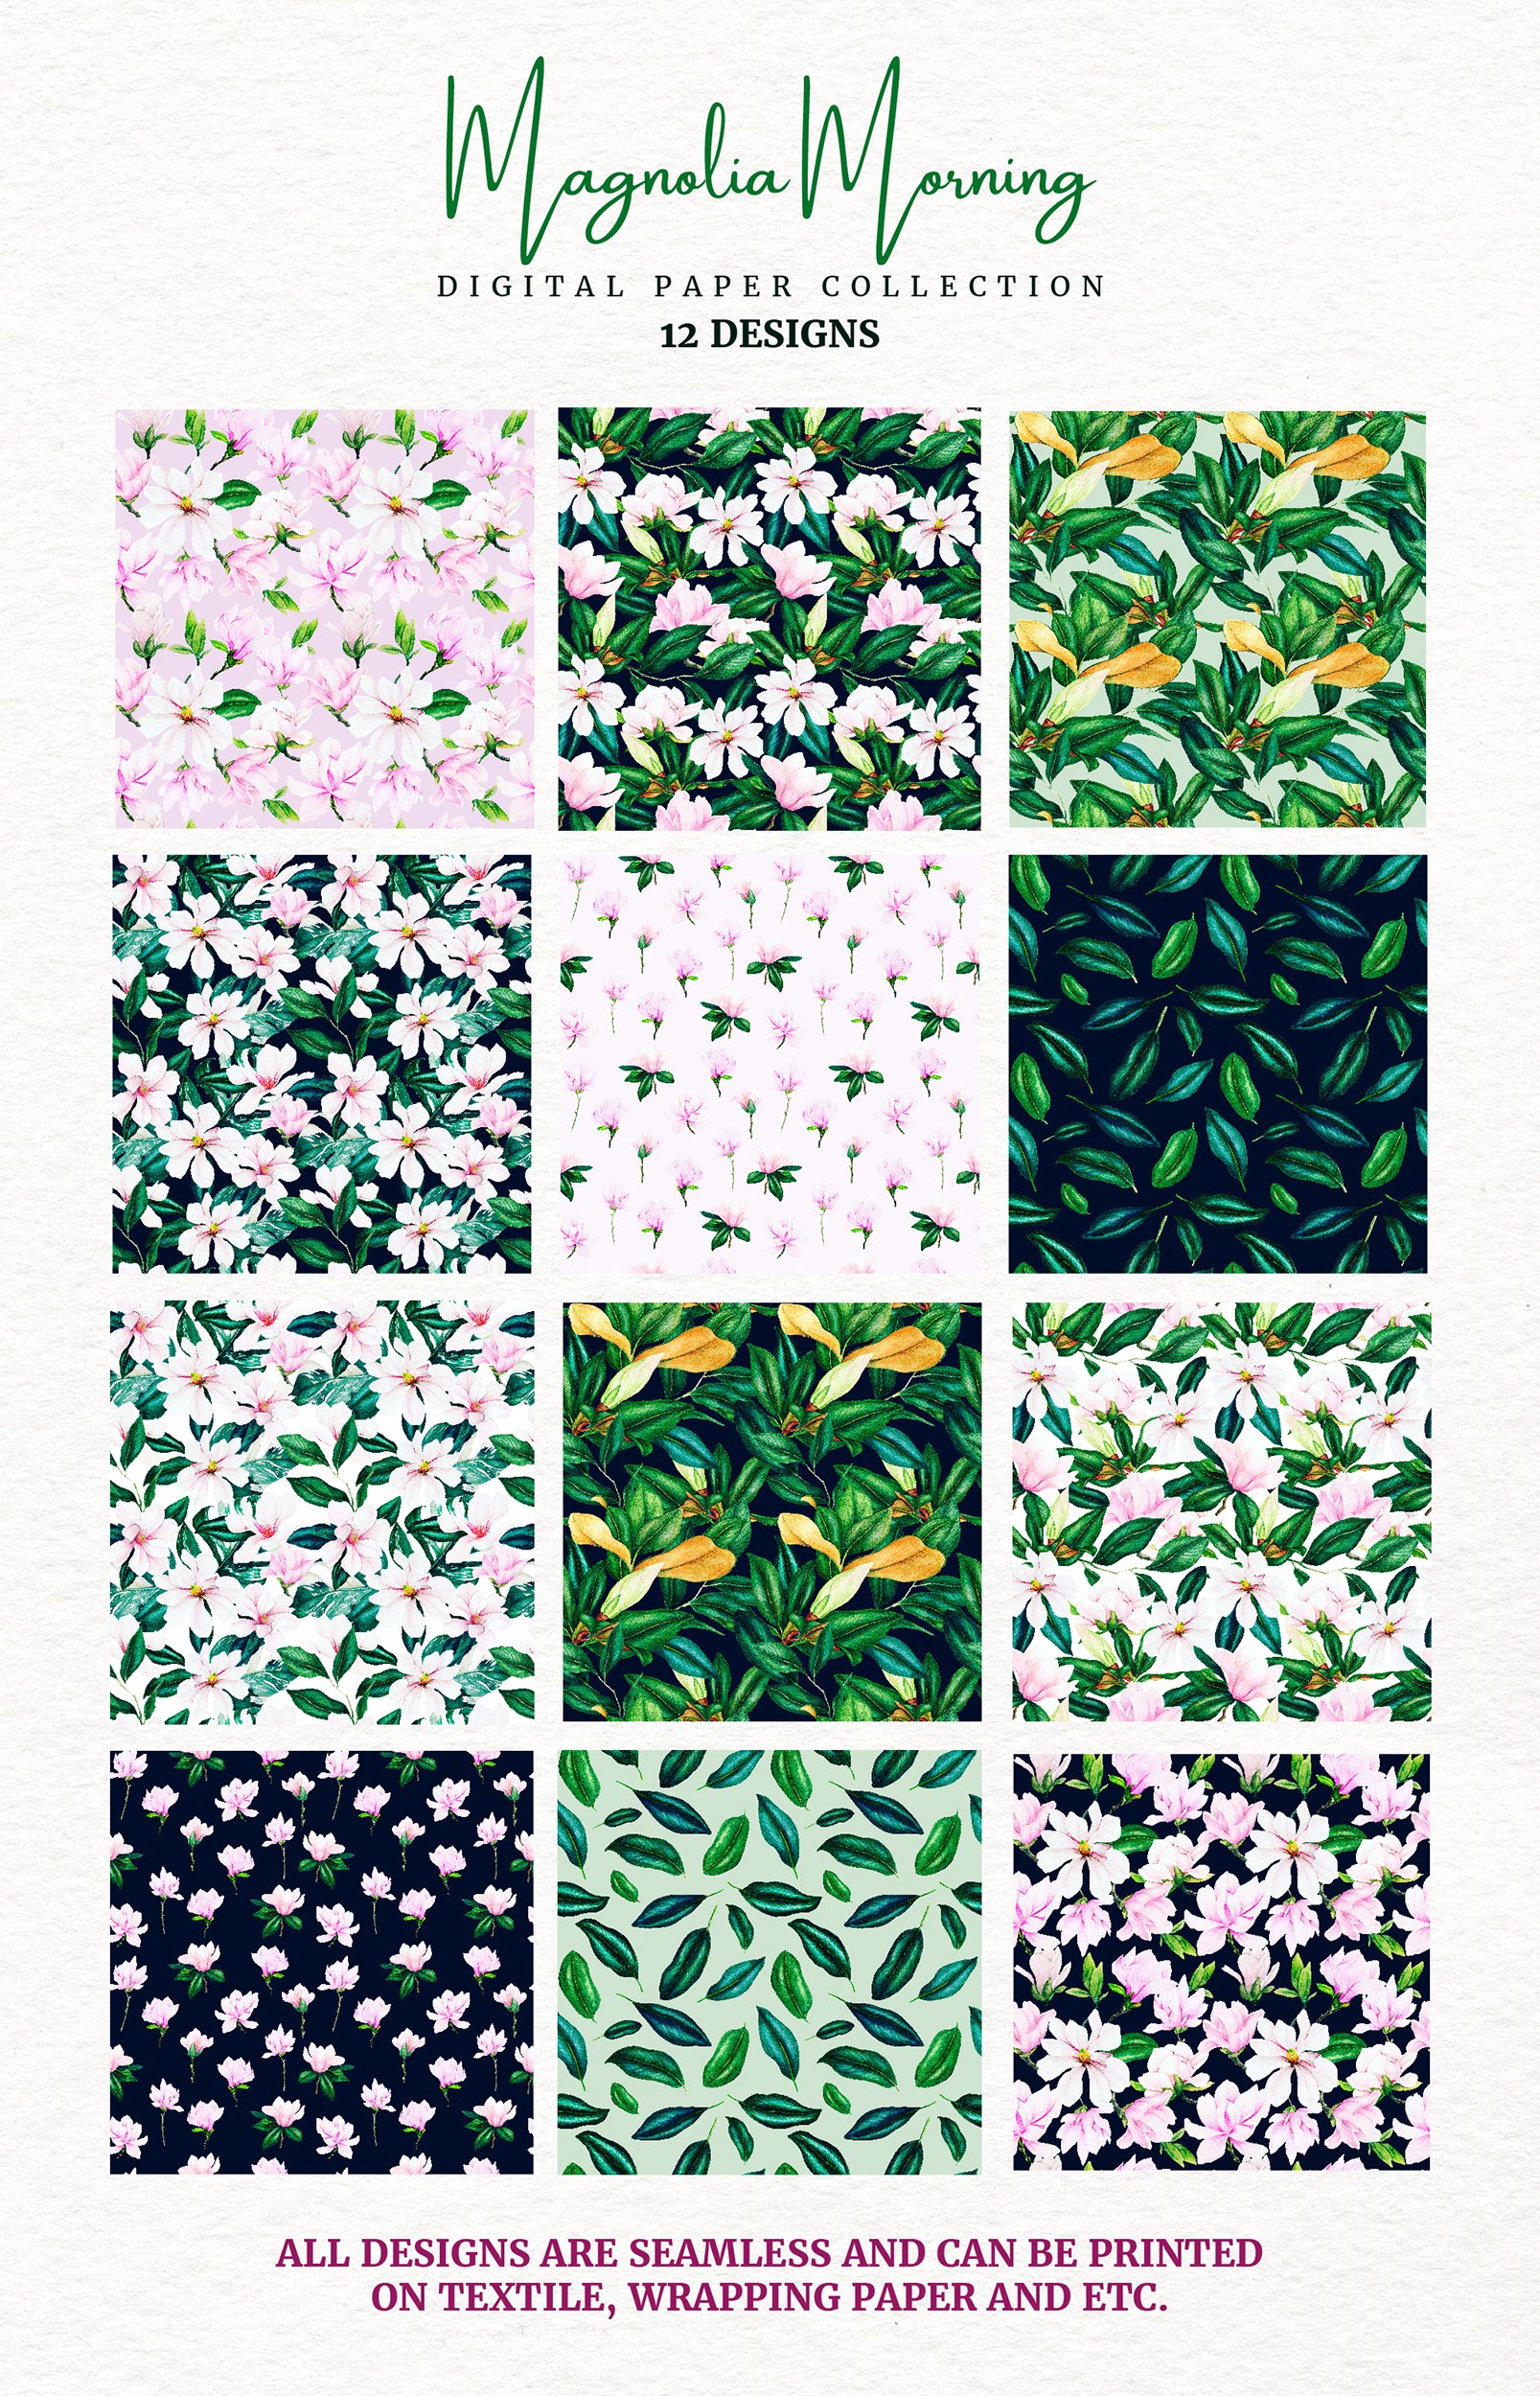 Magnolia Flowers - Watercolor Seamless Patterns